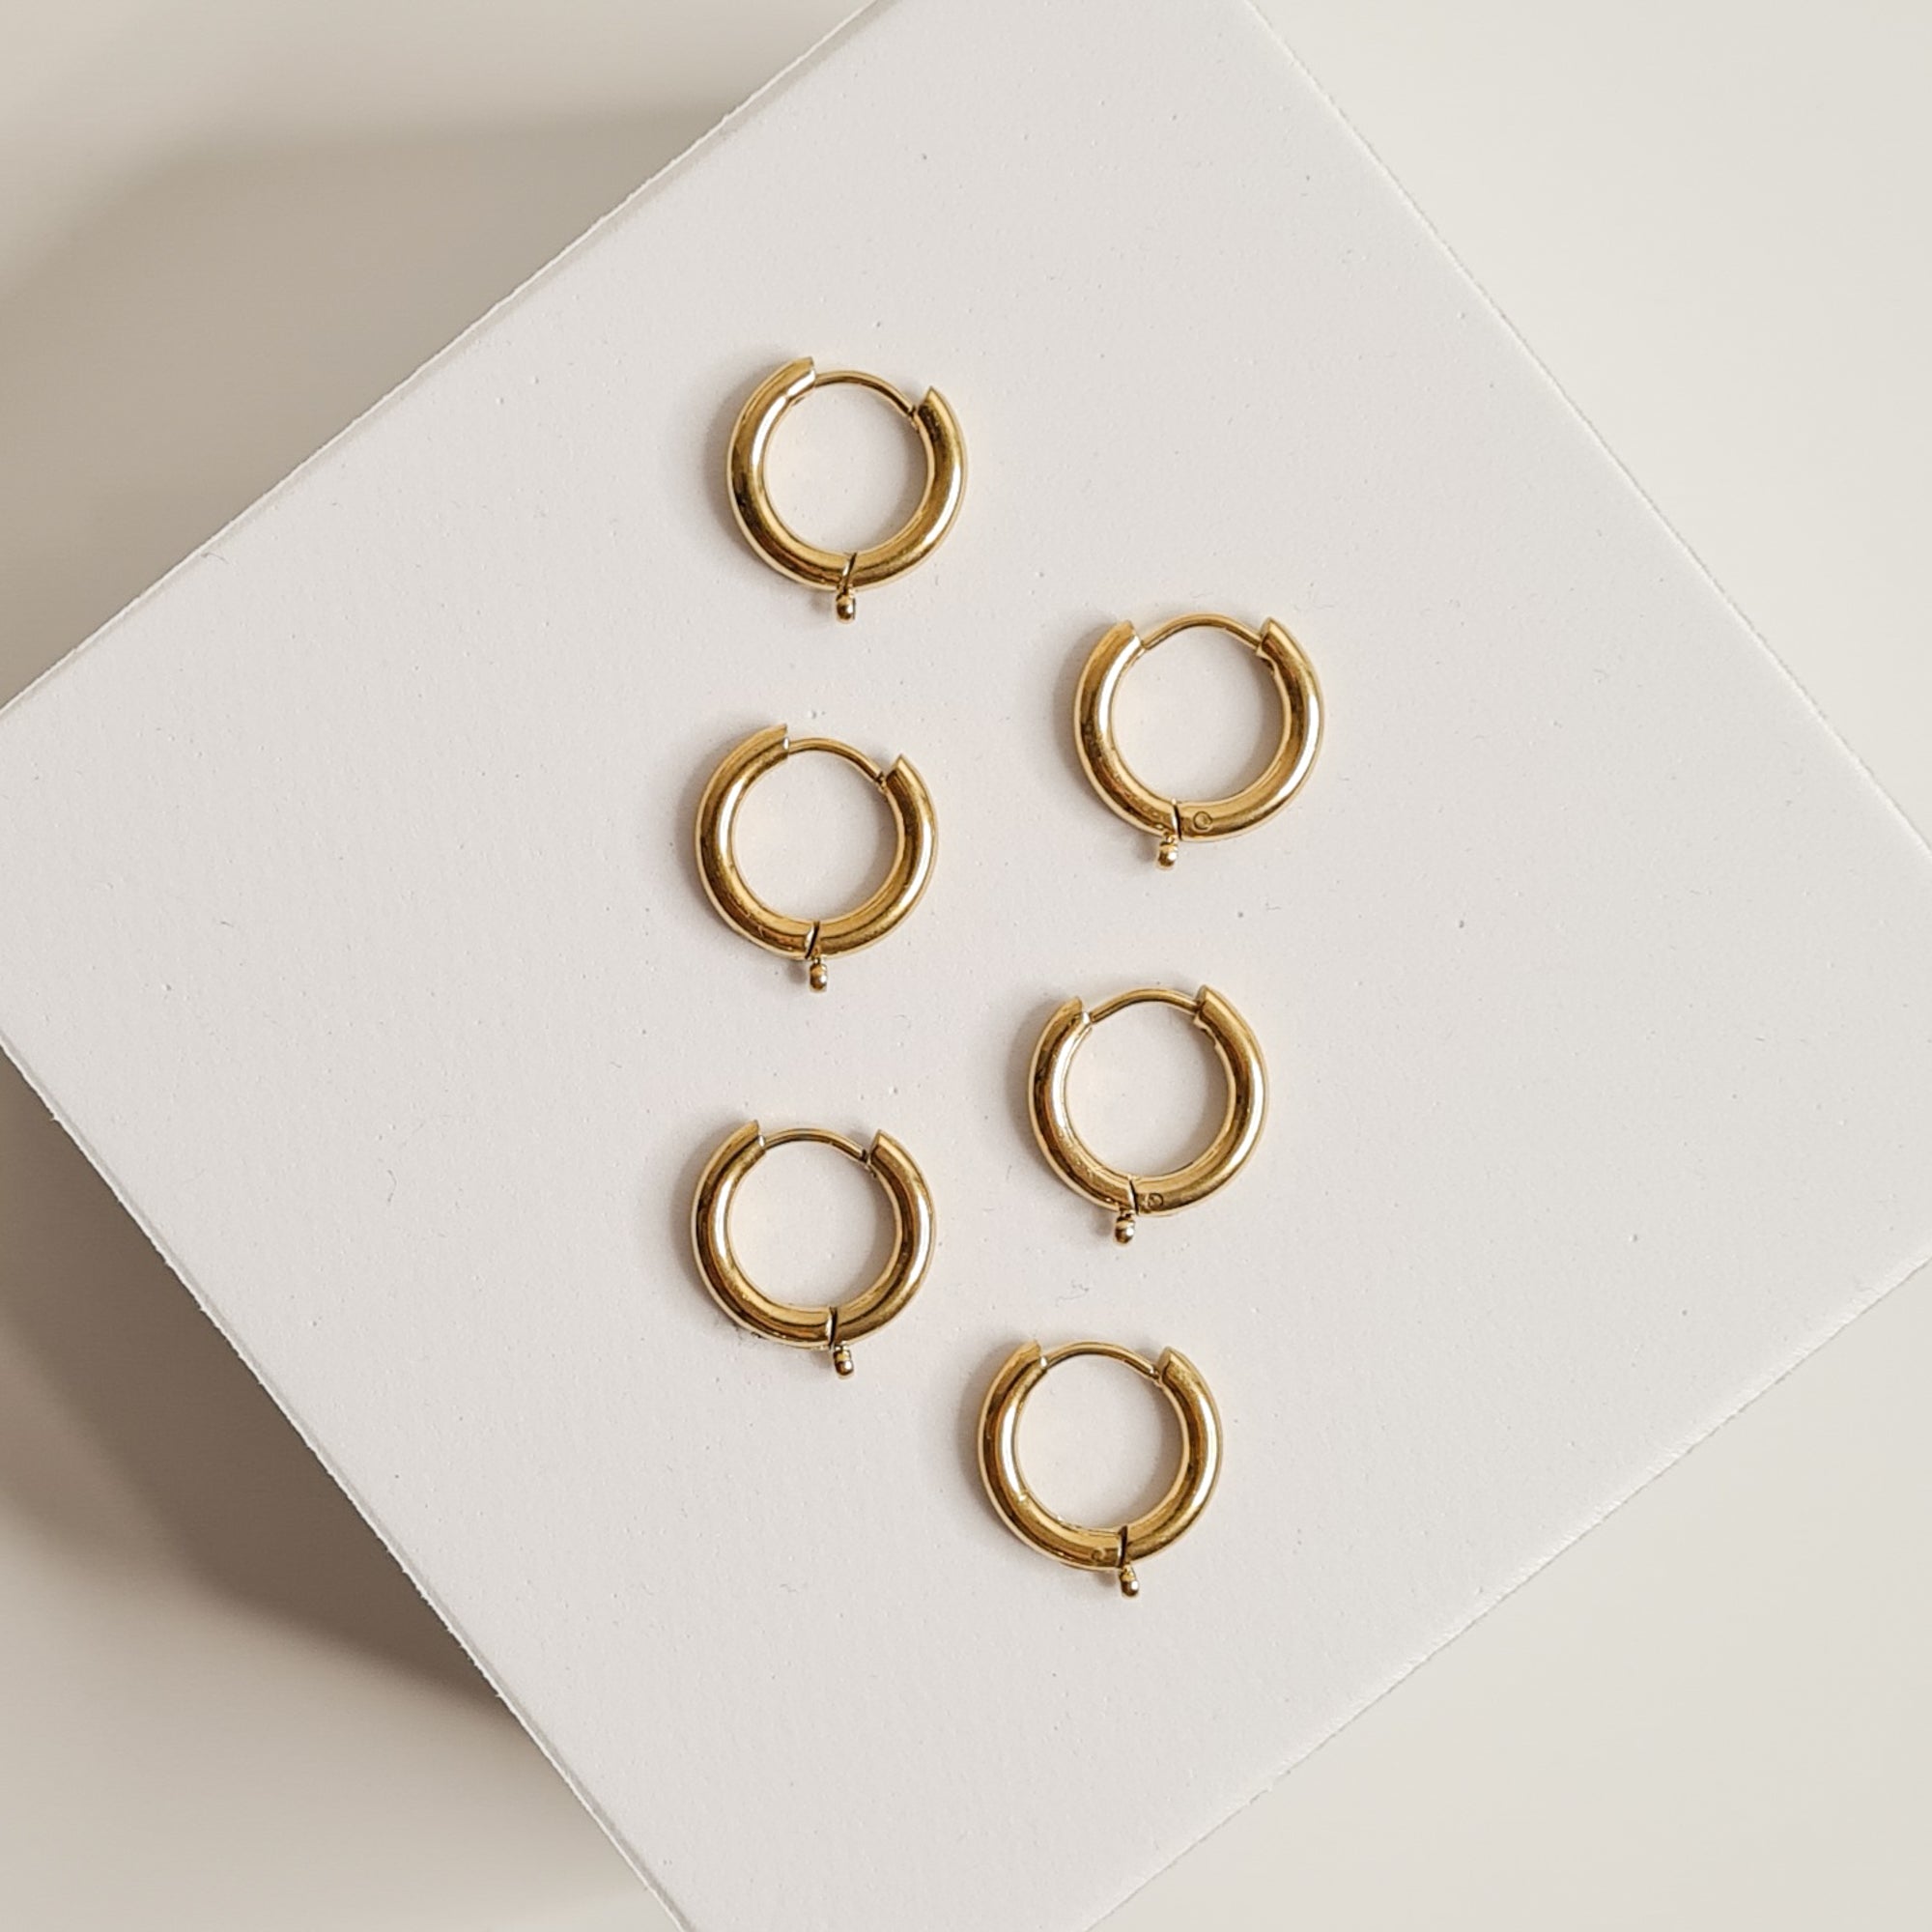 15mm Gold Plated Smooth Earring Hoops - Set of 10